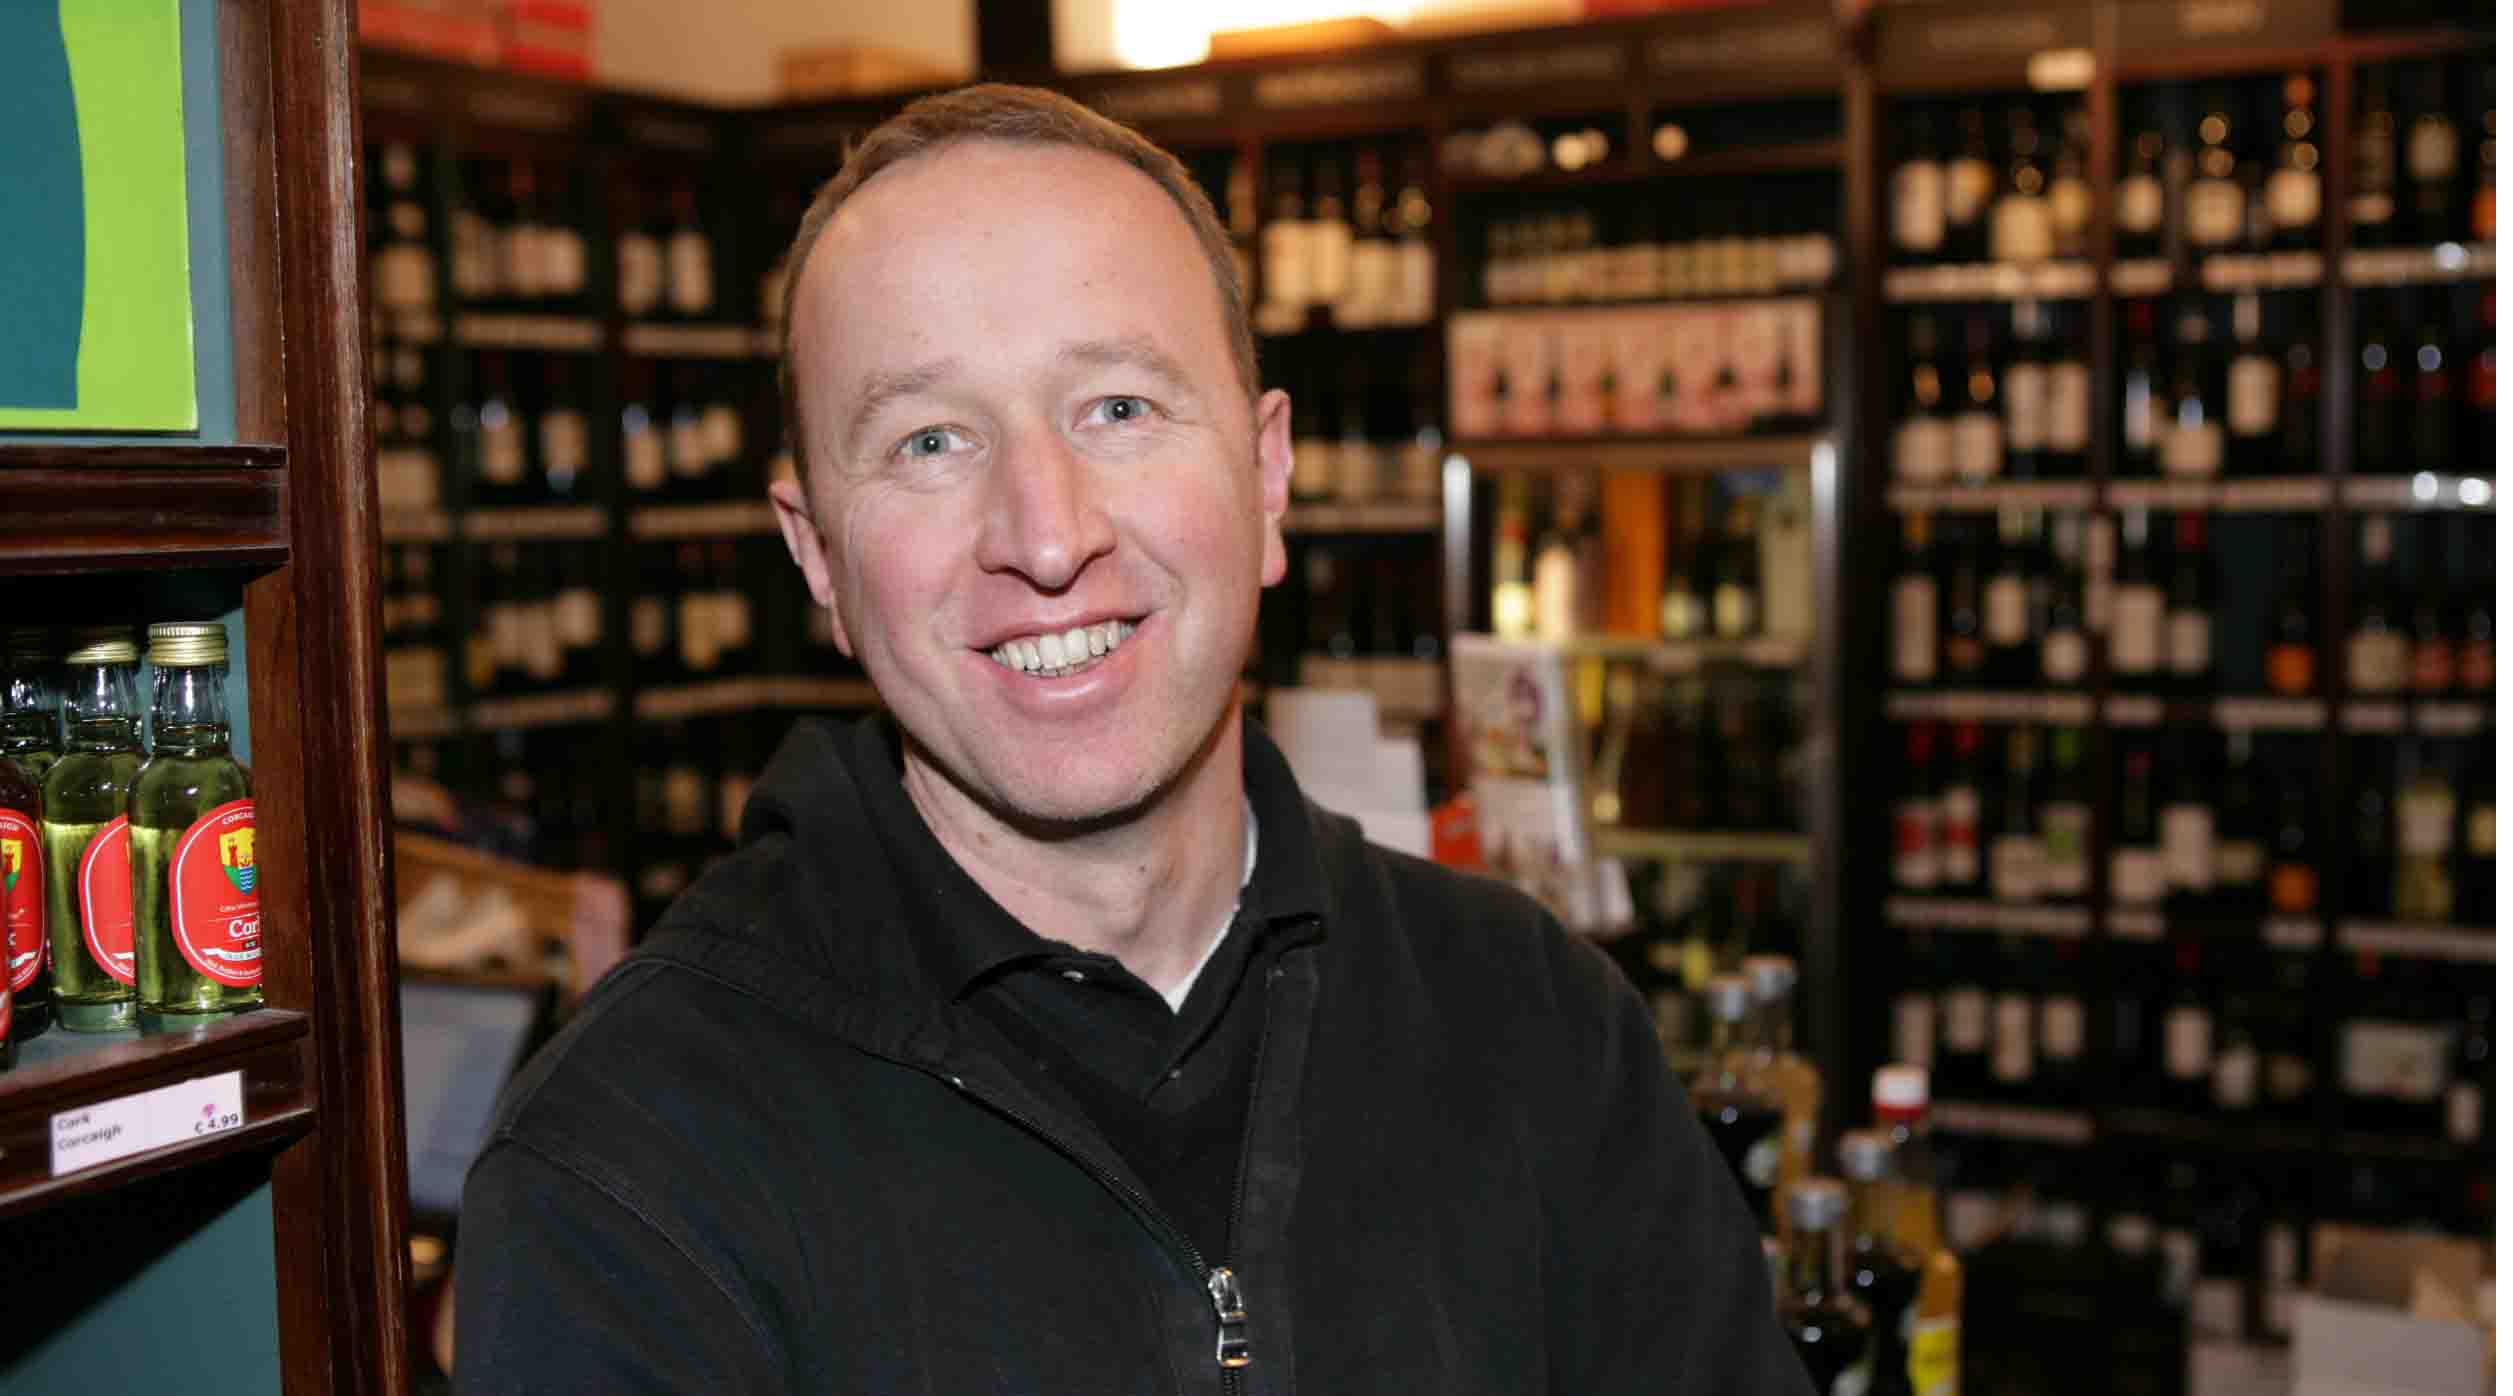 “My staff and I have a huge passion for whiskey and continually work to improve our offerings to our local and international customers in order to offer the best whiskey experience possible,” says Celtic Whiskey Shop owner Ally Alpine.